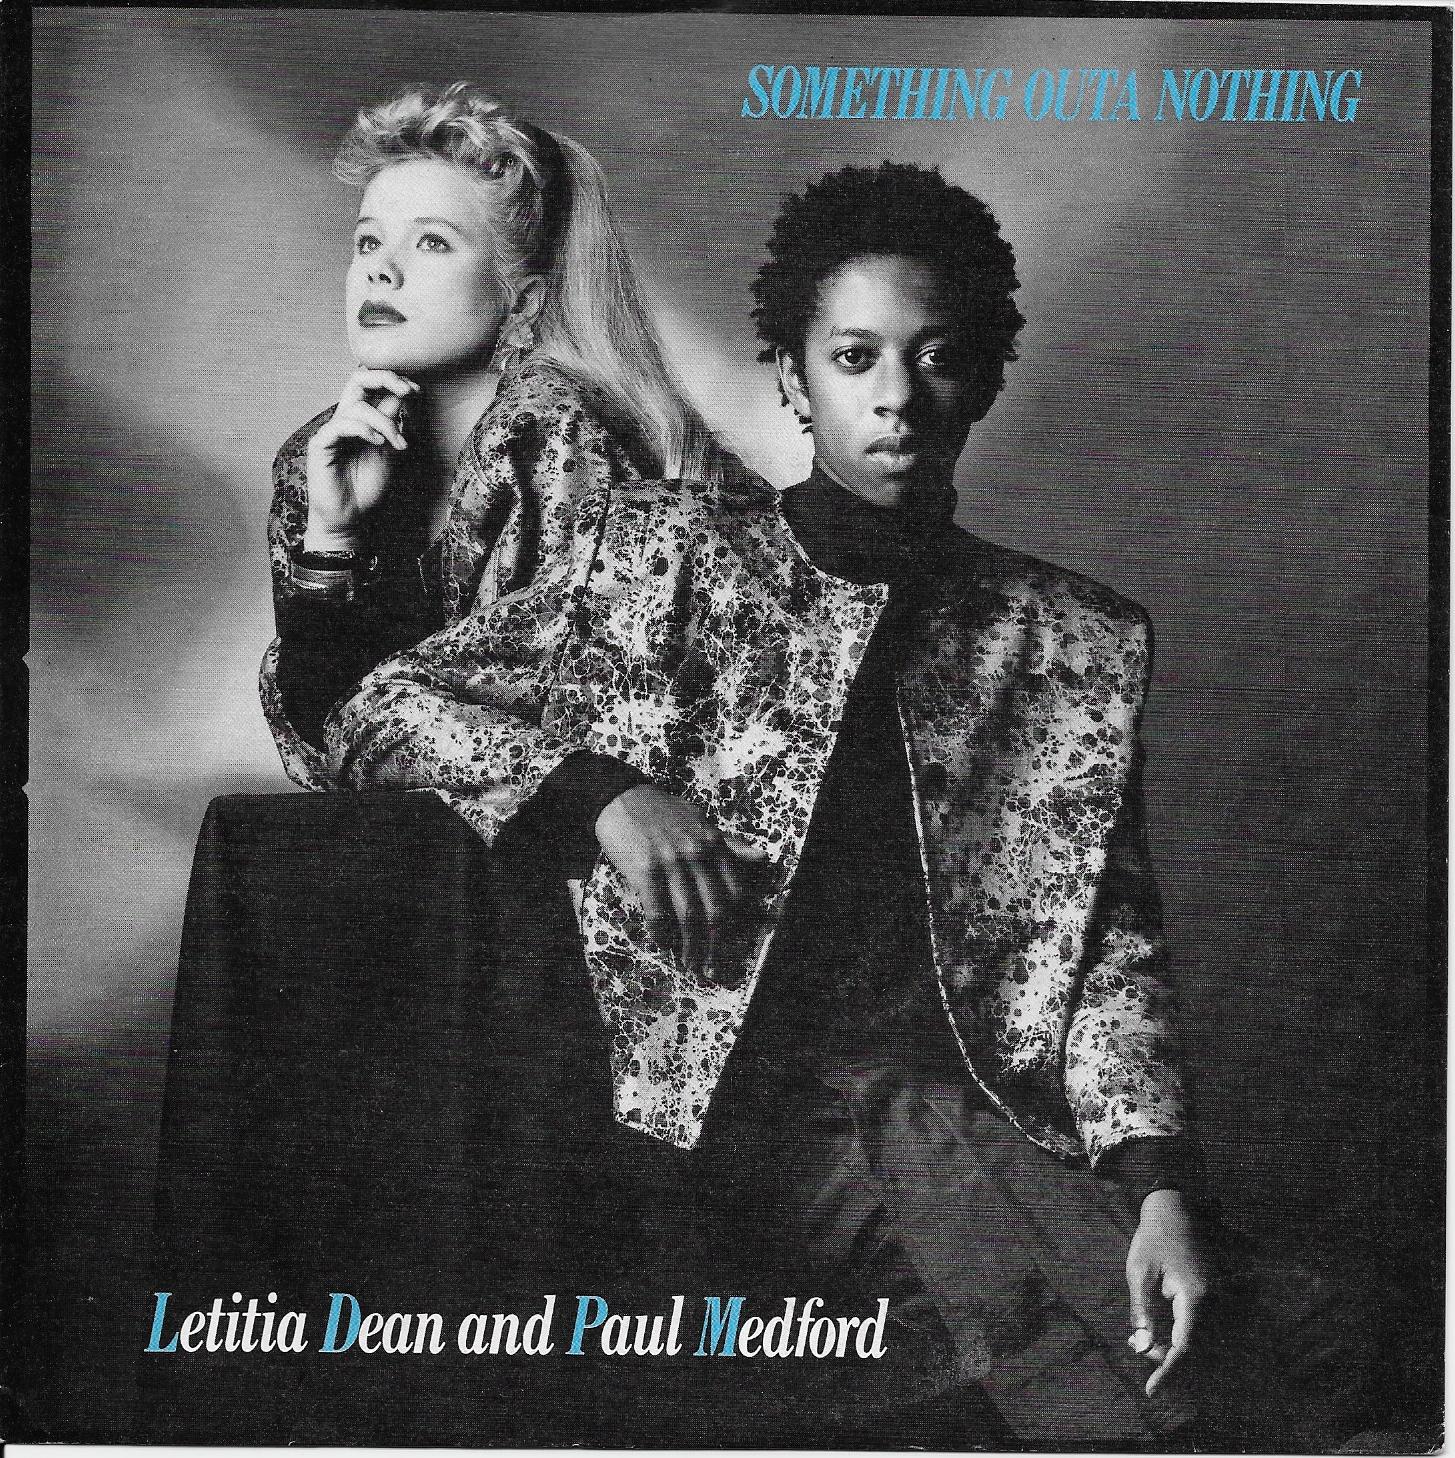 Picture of RESL 203 Something outa nothing (EastEnders) by artist Simon Wicks / Simon May 
 / Letitia Dean and Paul Medford from the BBC singles - Records and Tapes library